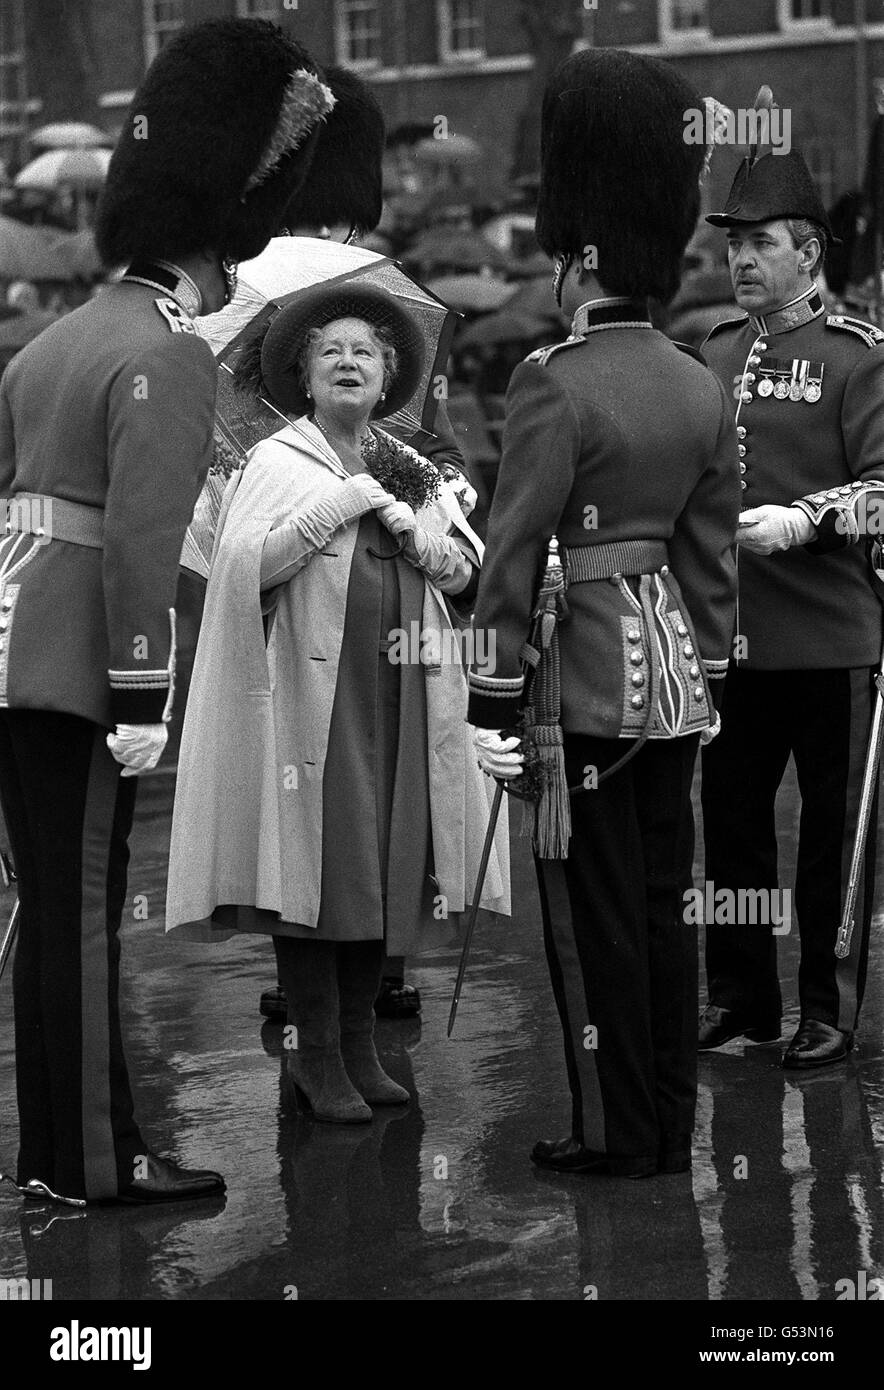 1980: An ample amount of shamrock adorns the Queen Mother's rain cape at Victoria barracks, Windsor, Berkshire, where she presented officers men of the Irish Guards with shamrock during their traditional St. Patrick's Day parade. Stock Photo